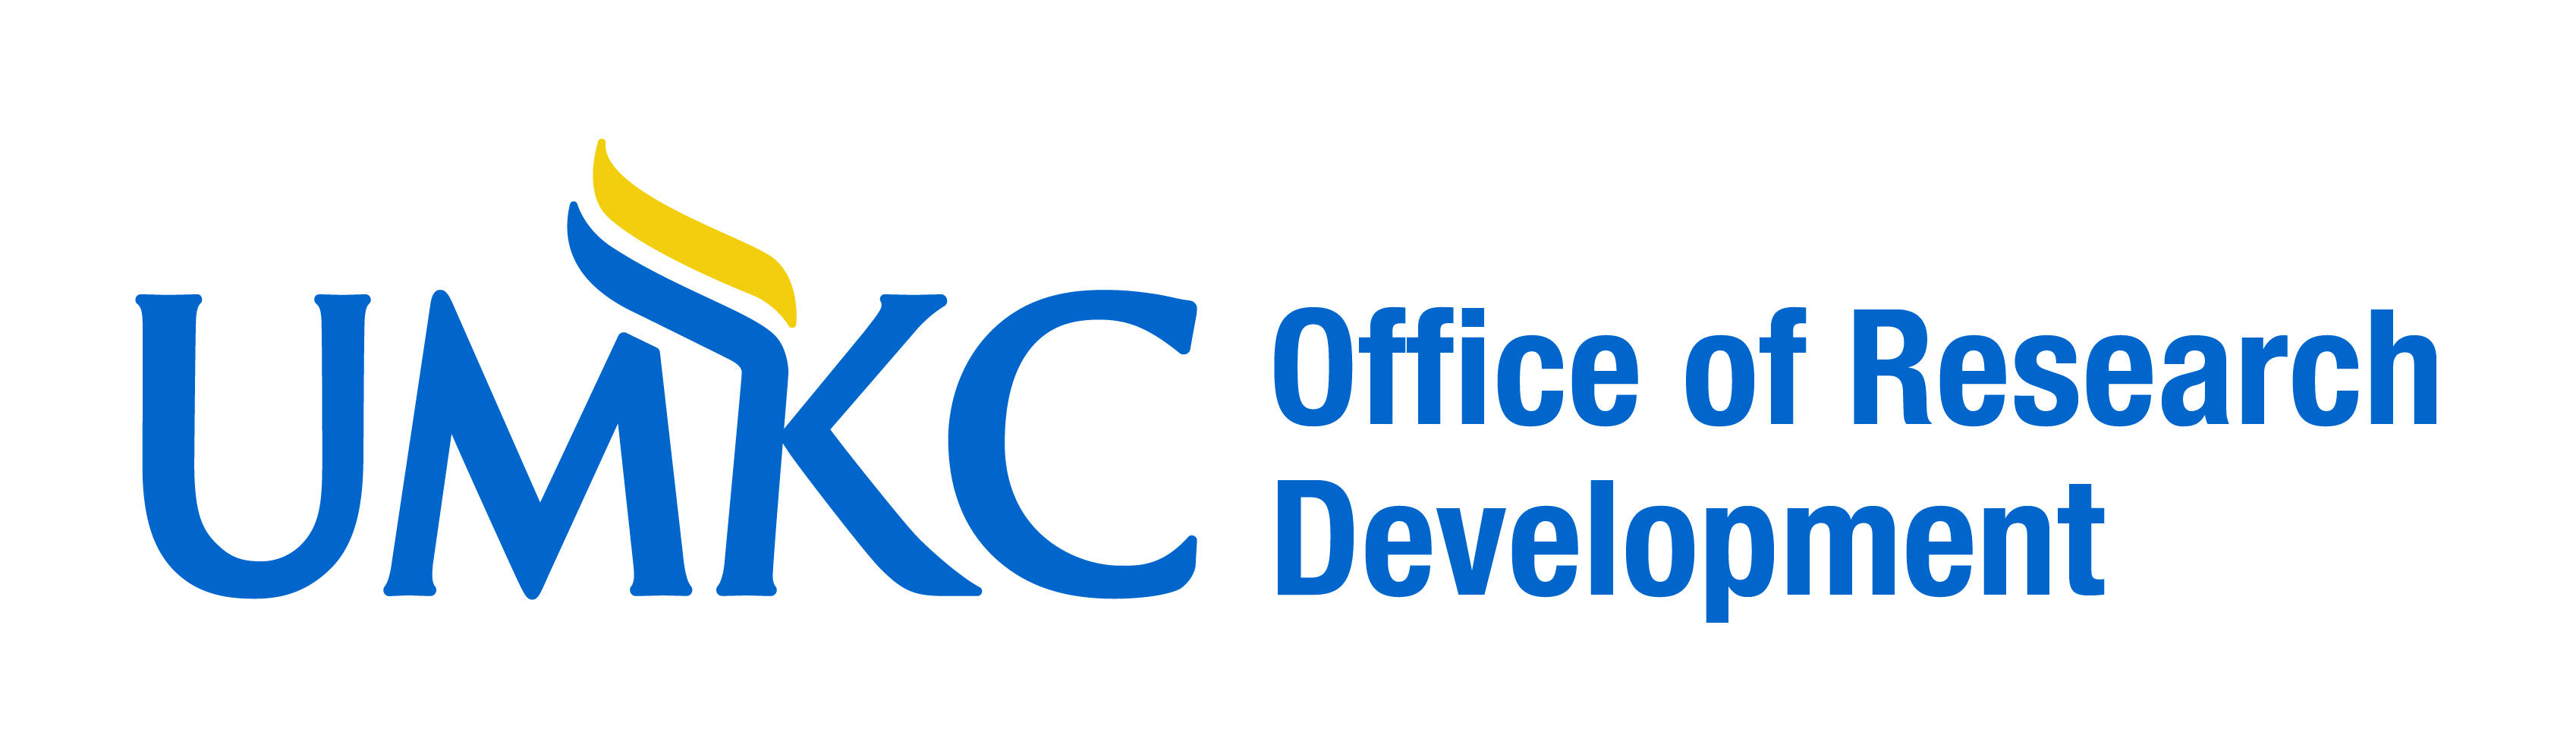 umkc logo and words office of research development